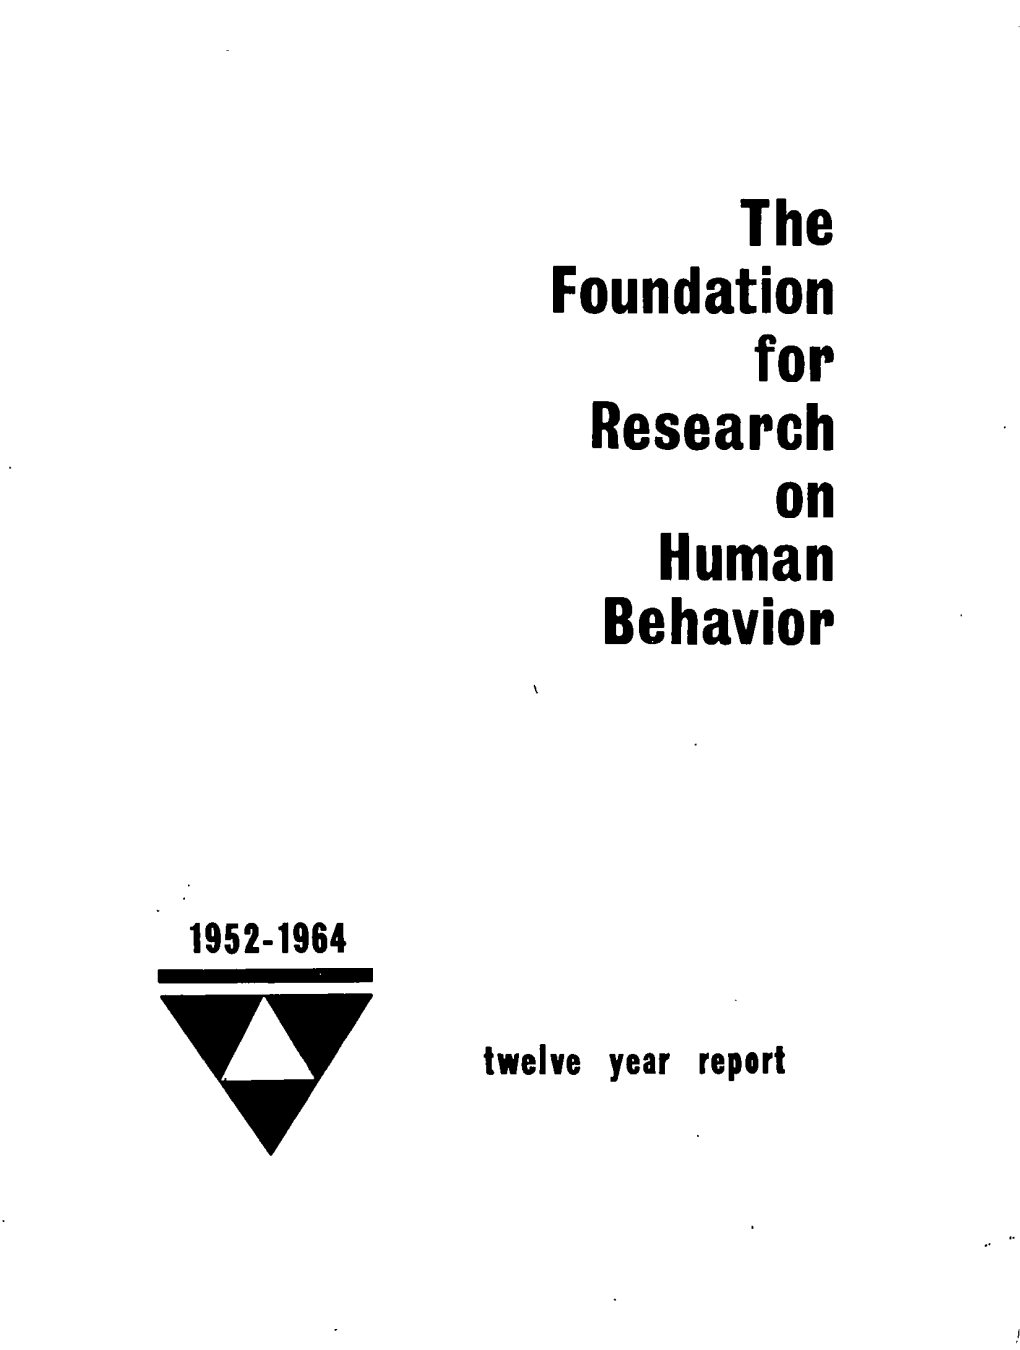 The Foundation for Research on Human Behavior